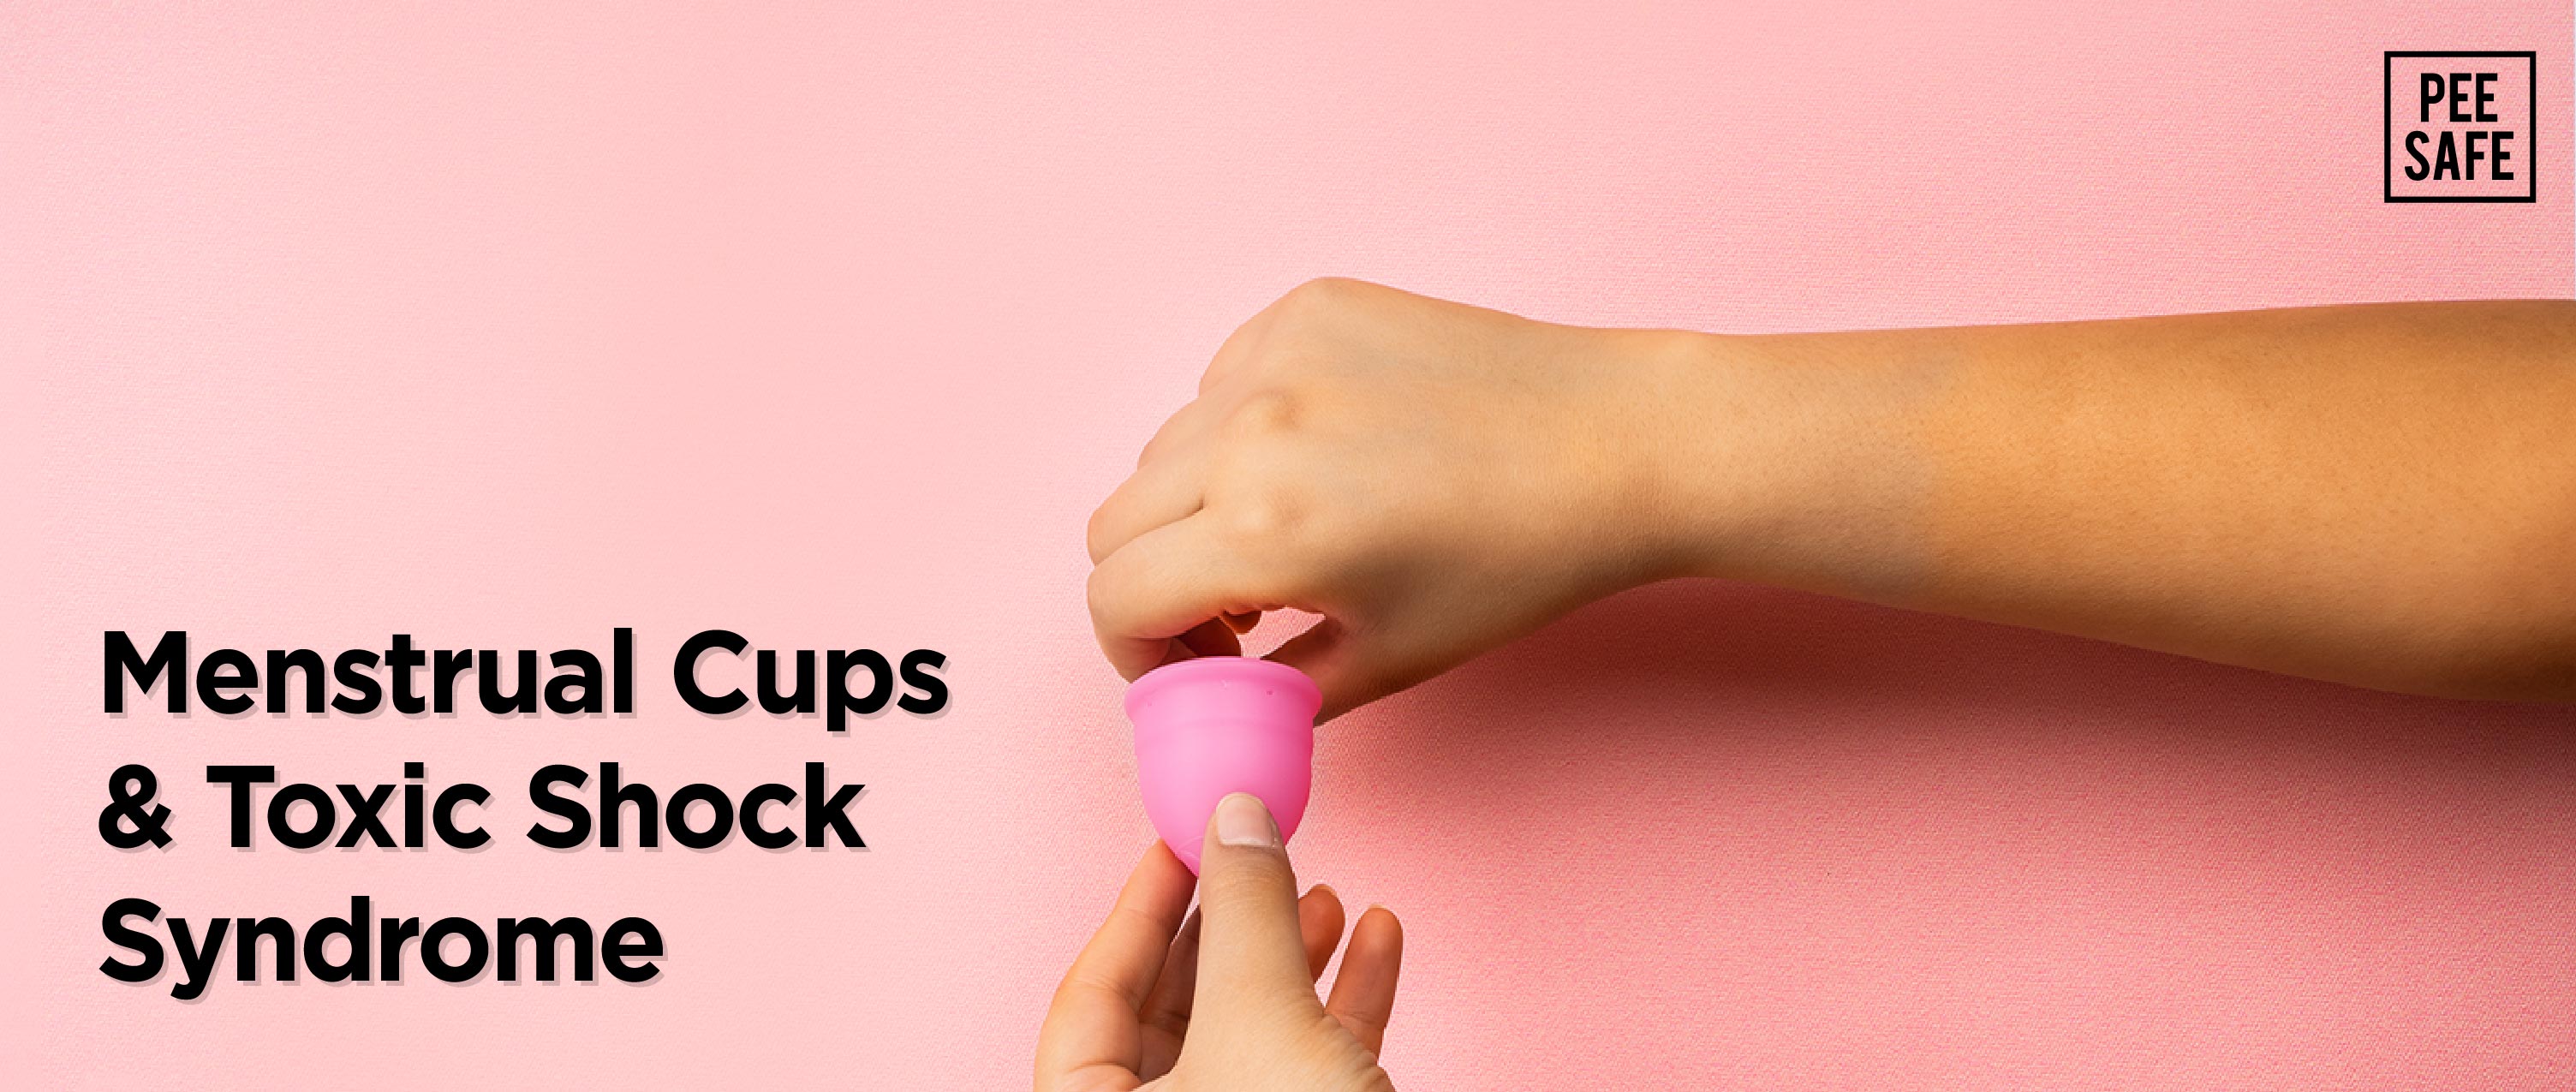 menstrual cup & toxic shock syndrome